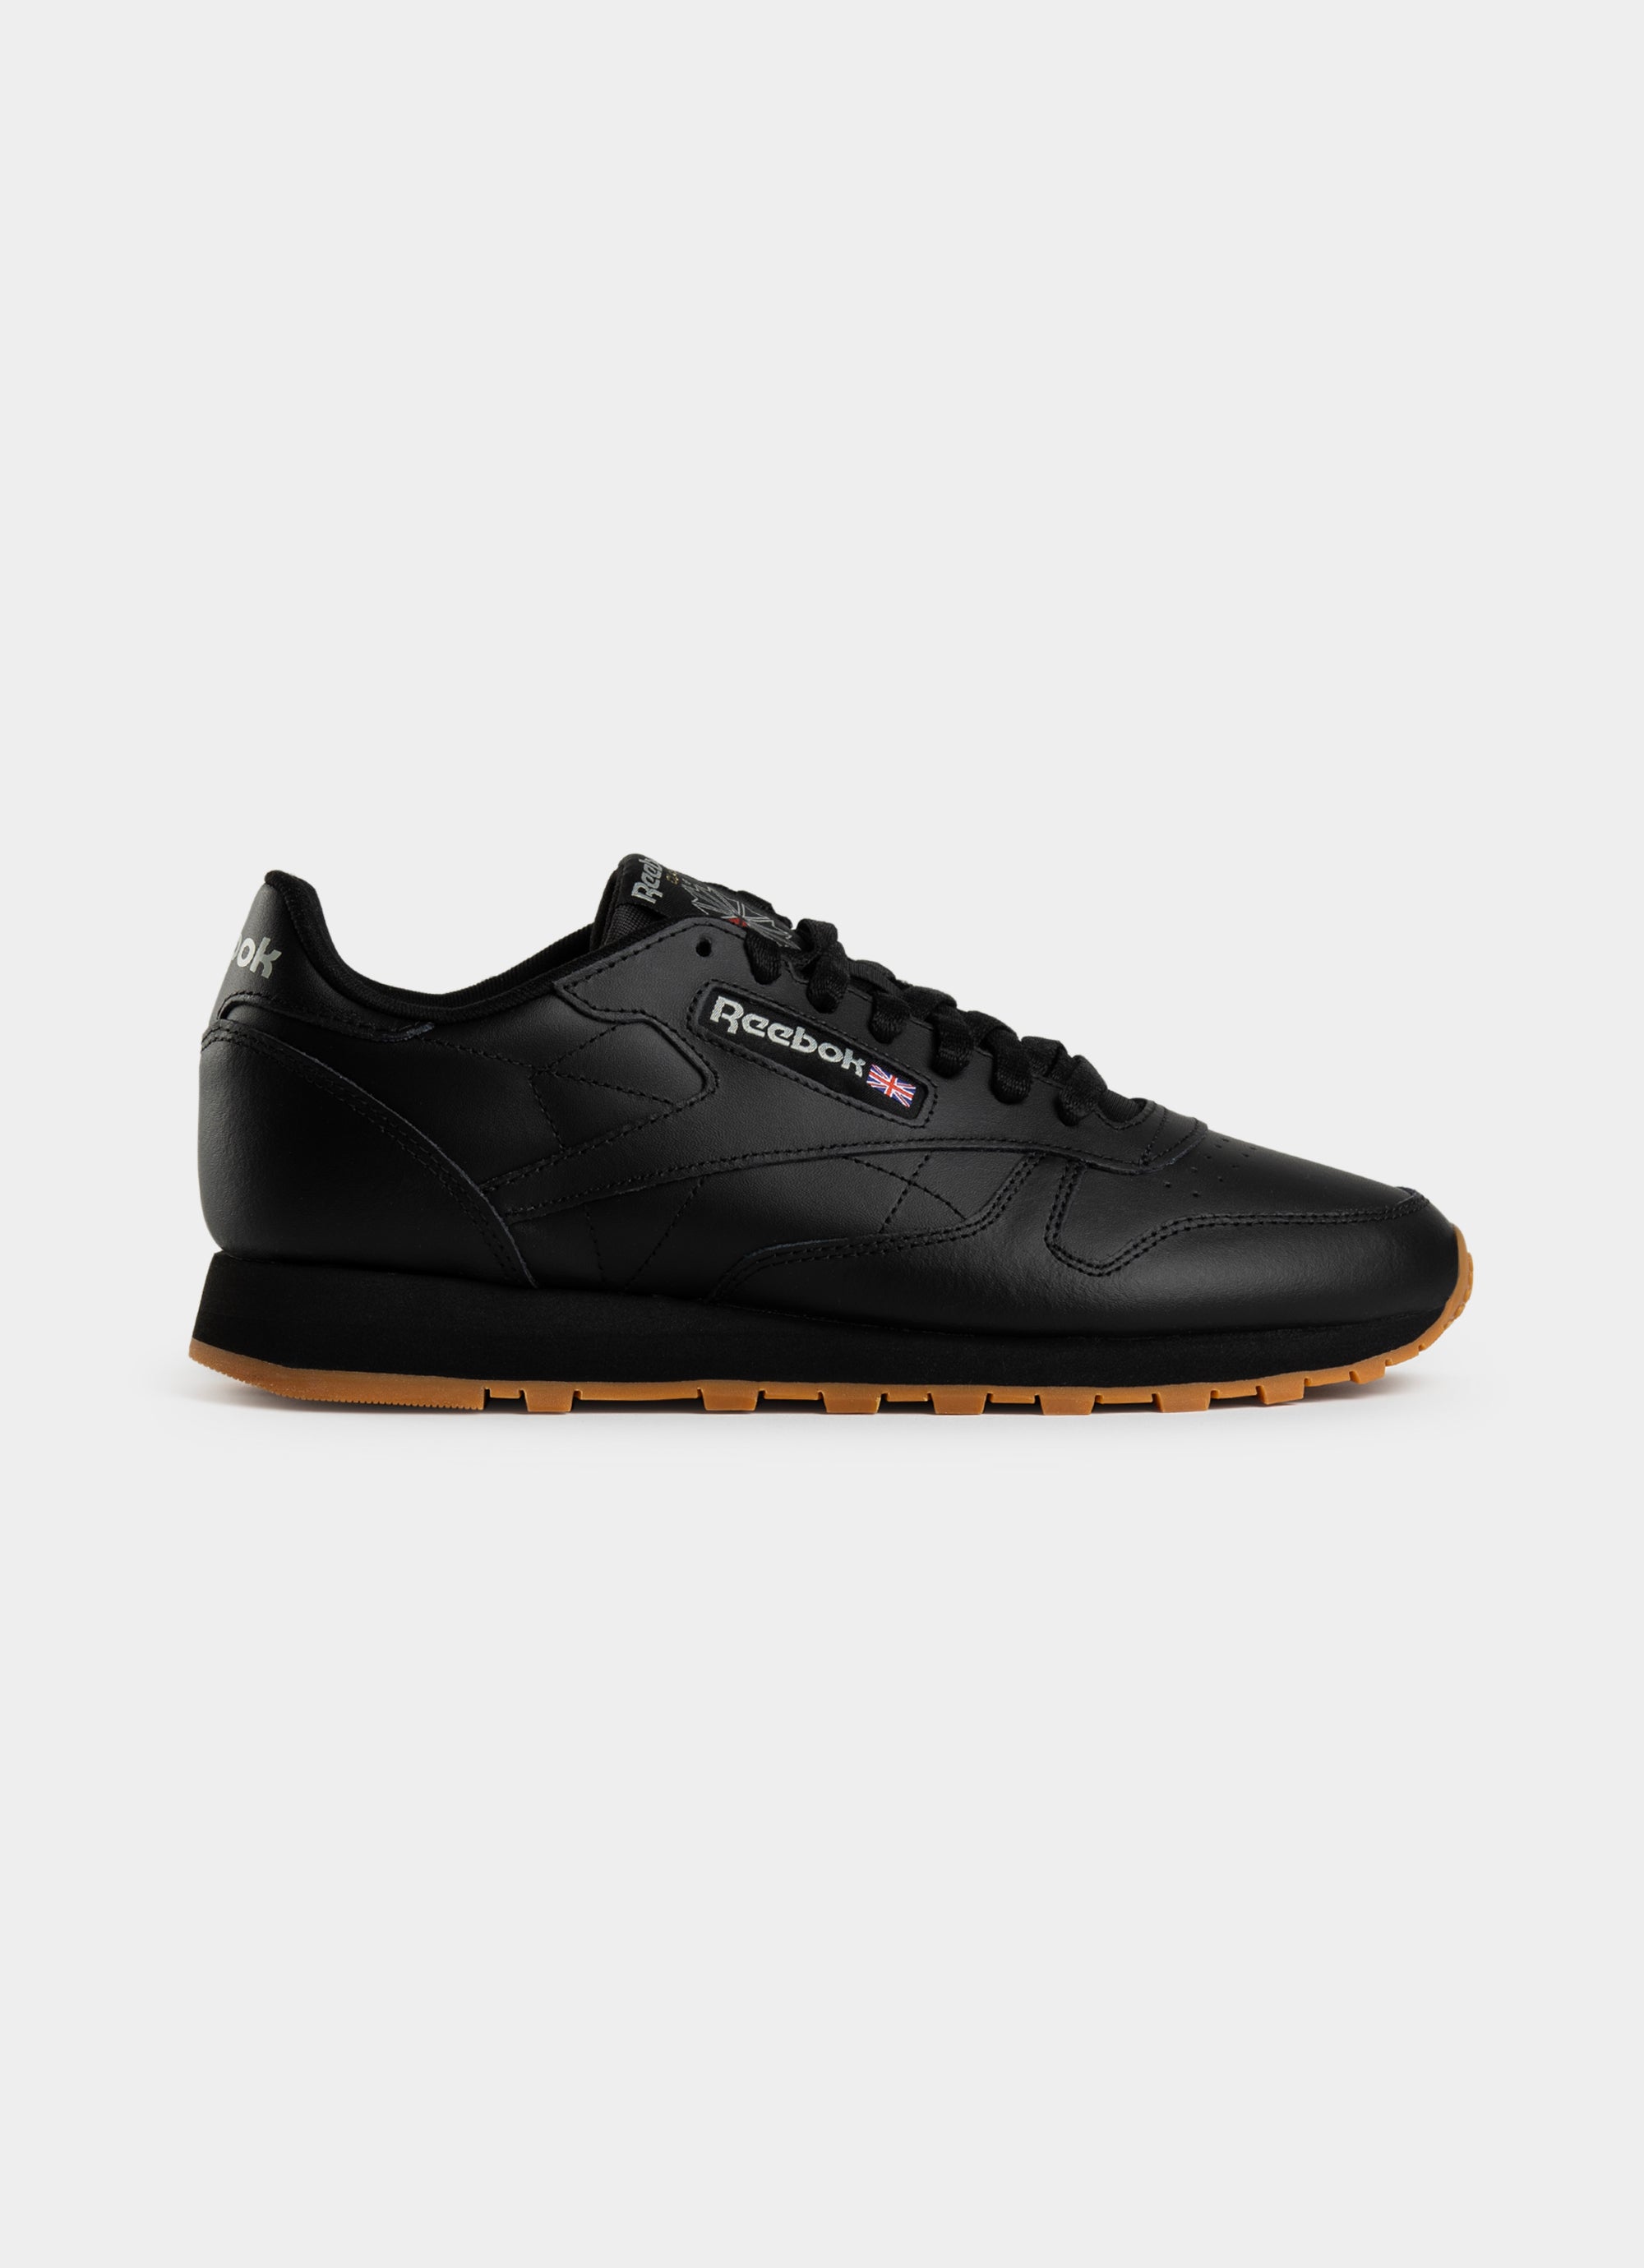 Reebok Classic Leather Shoes in Black | Rat